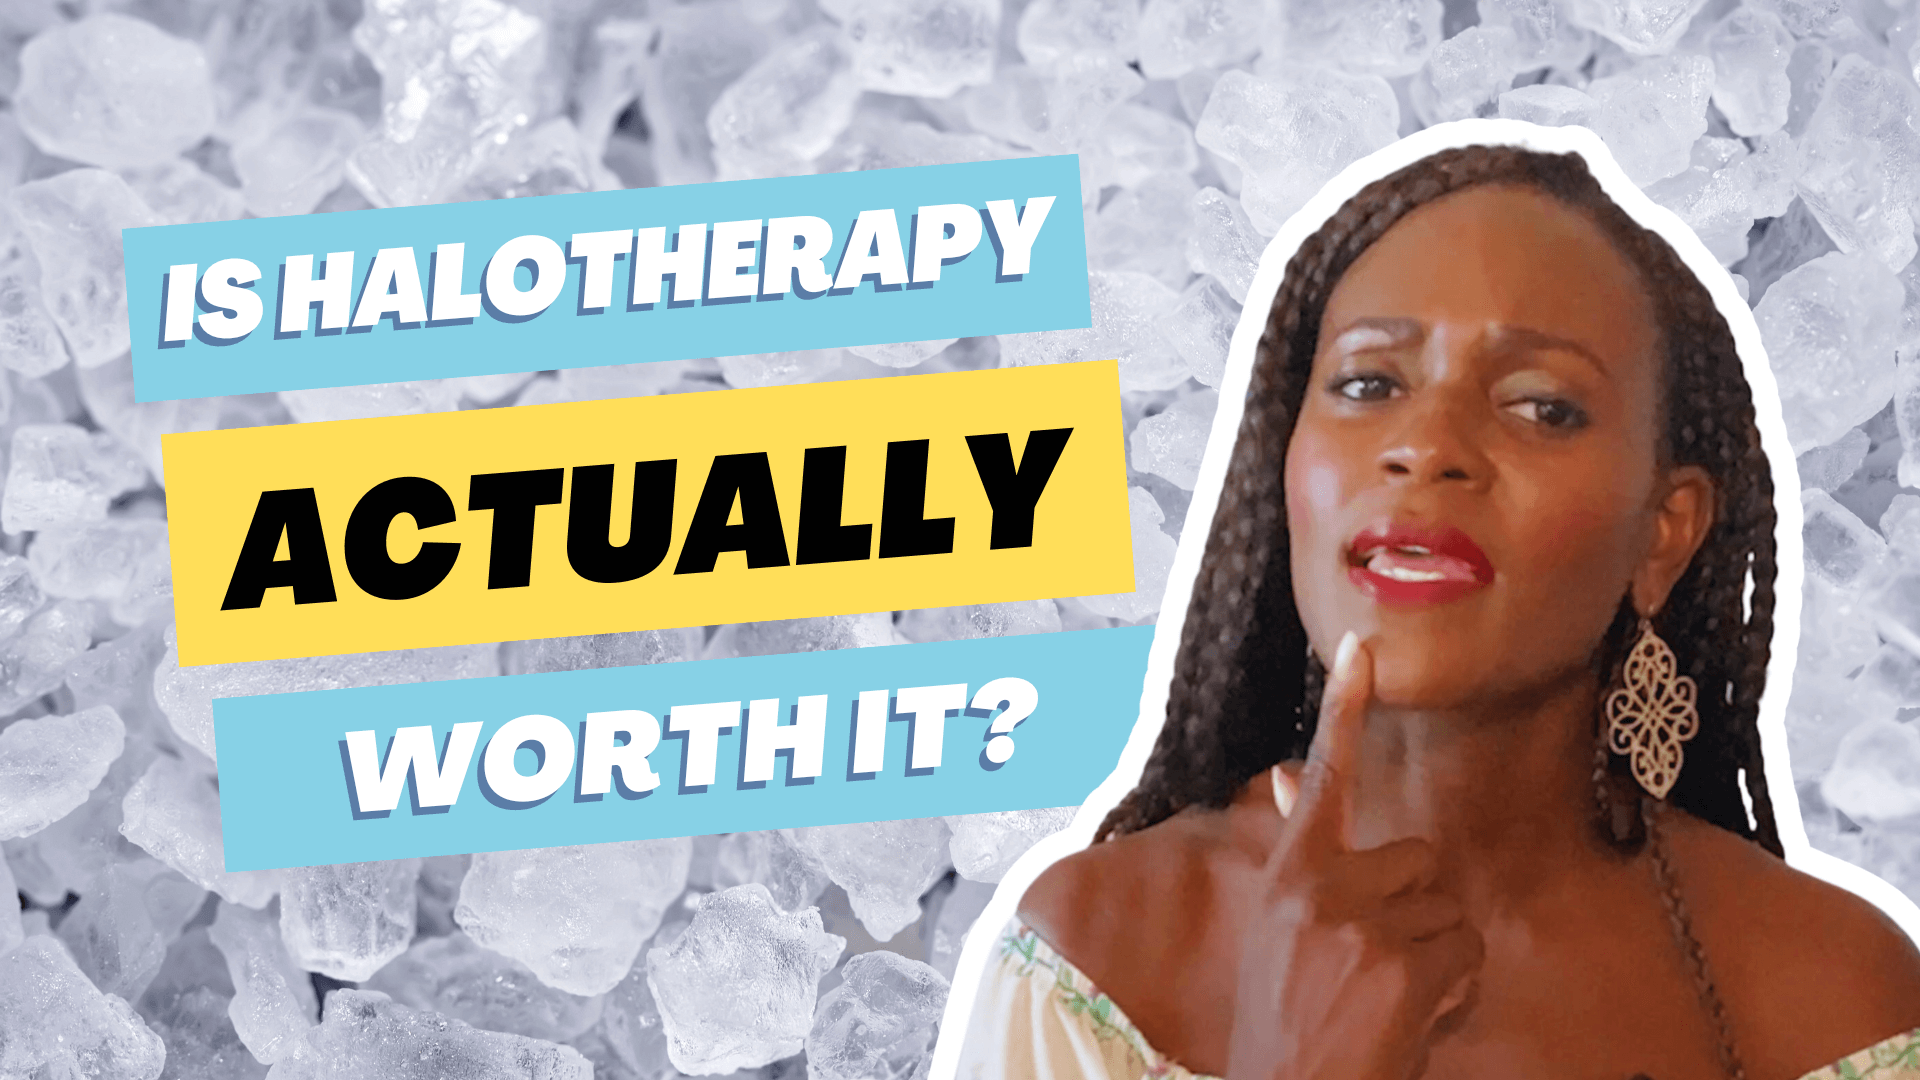 Is halotherapy worth it?